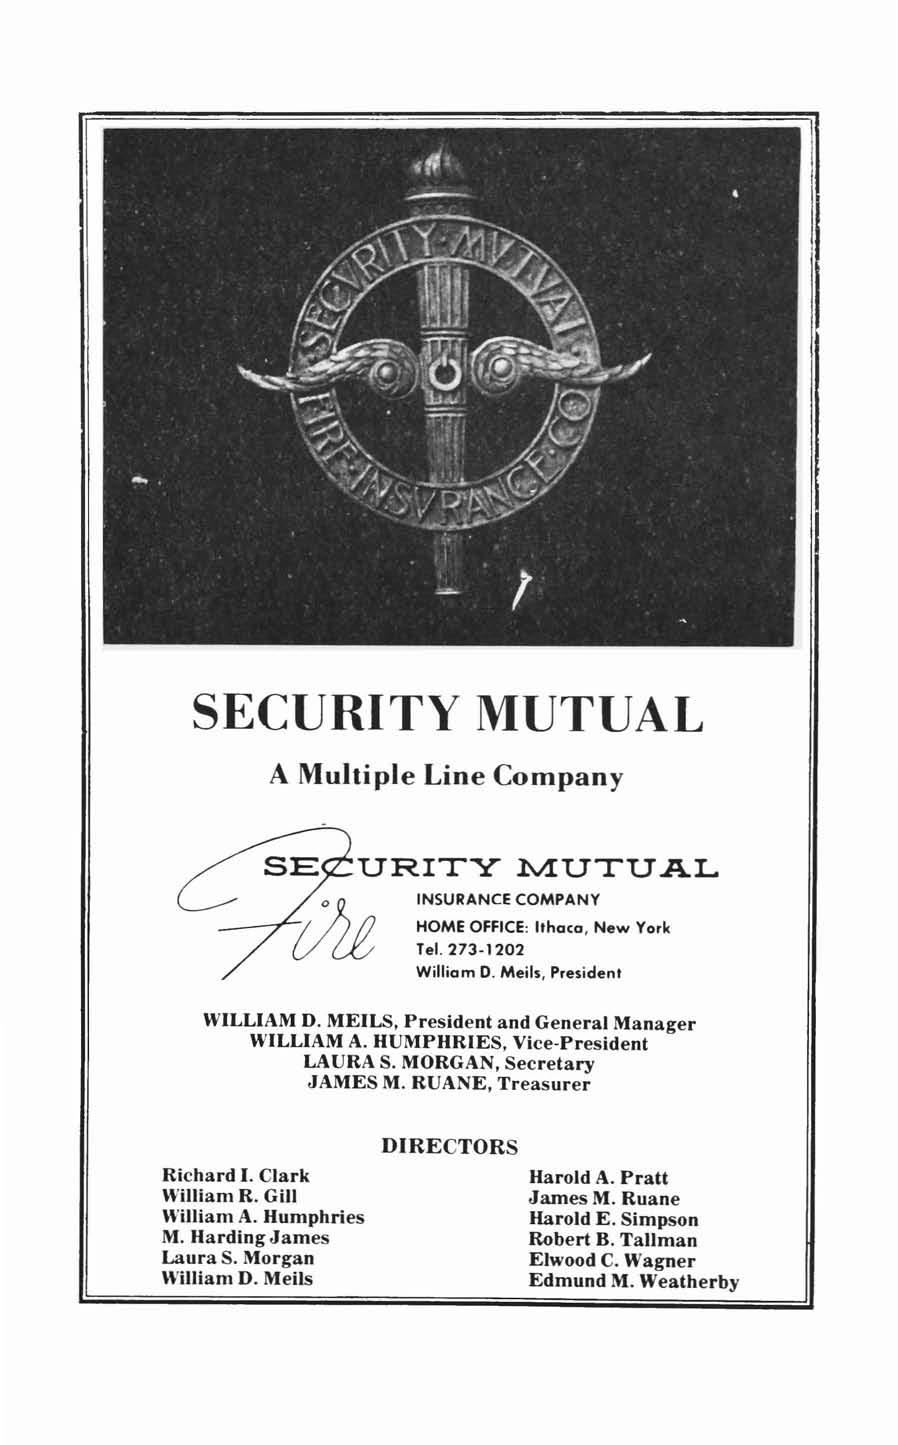 SECURITY MUTUAL A Multiple Line Company SE URITY ~UTUAL INSURANCE COMPANY HOME OFFICE: Ithaca, New York Tel. 273-1202 William D. Meils, President WILLIAM D.